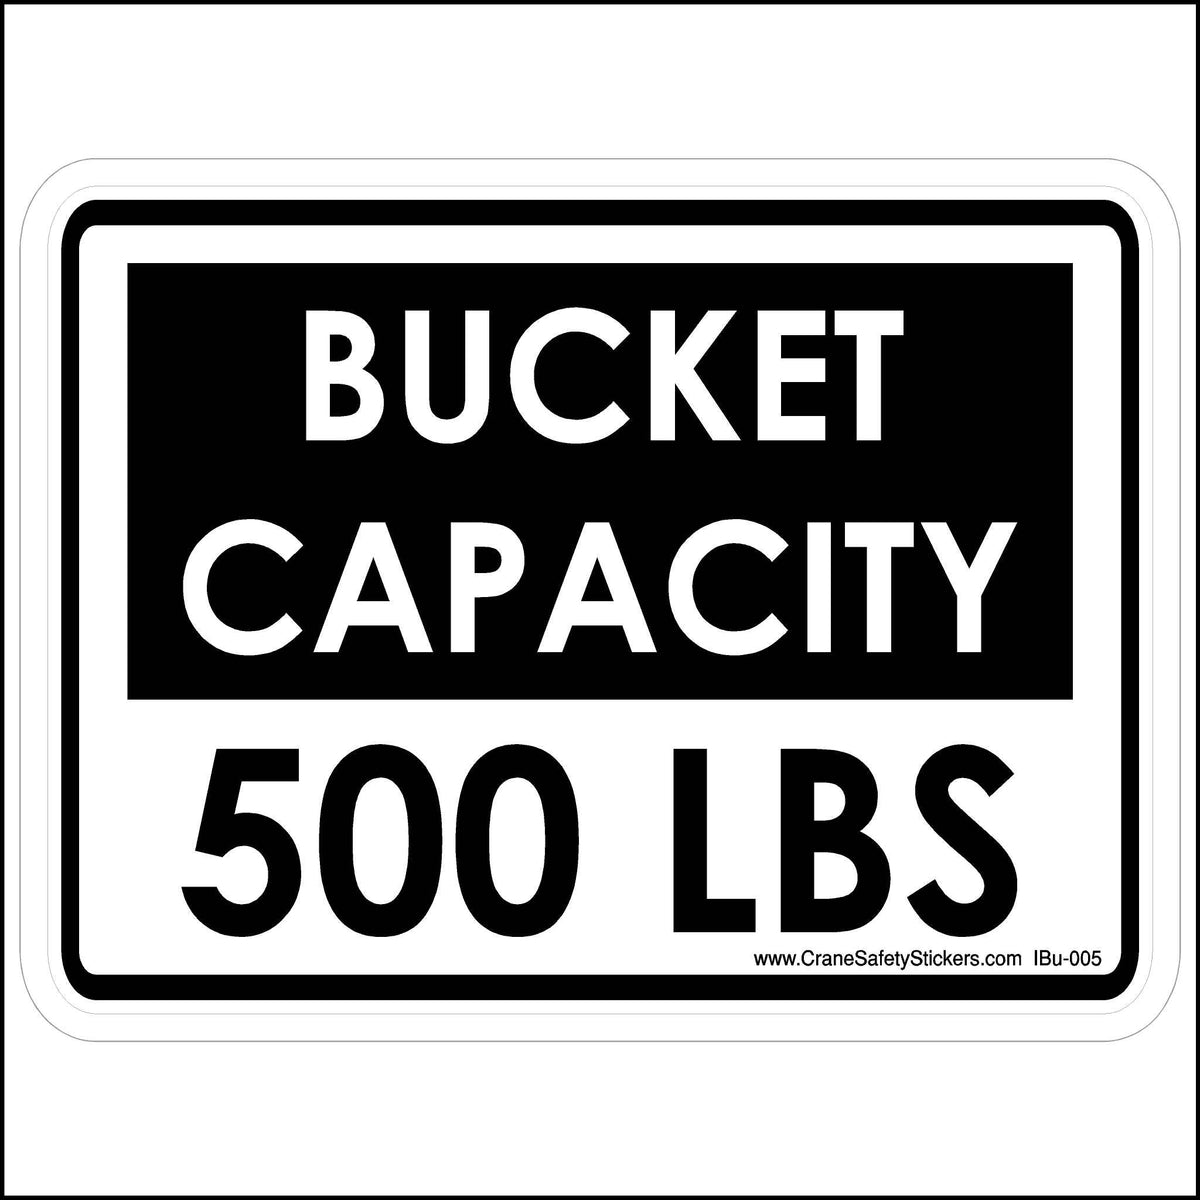 This Bucket Capacity 500 Lbs Sticker For Bucket Trucks Is Printed With. Bucket Capacity 500 LBS.